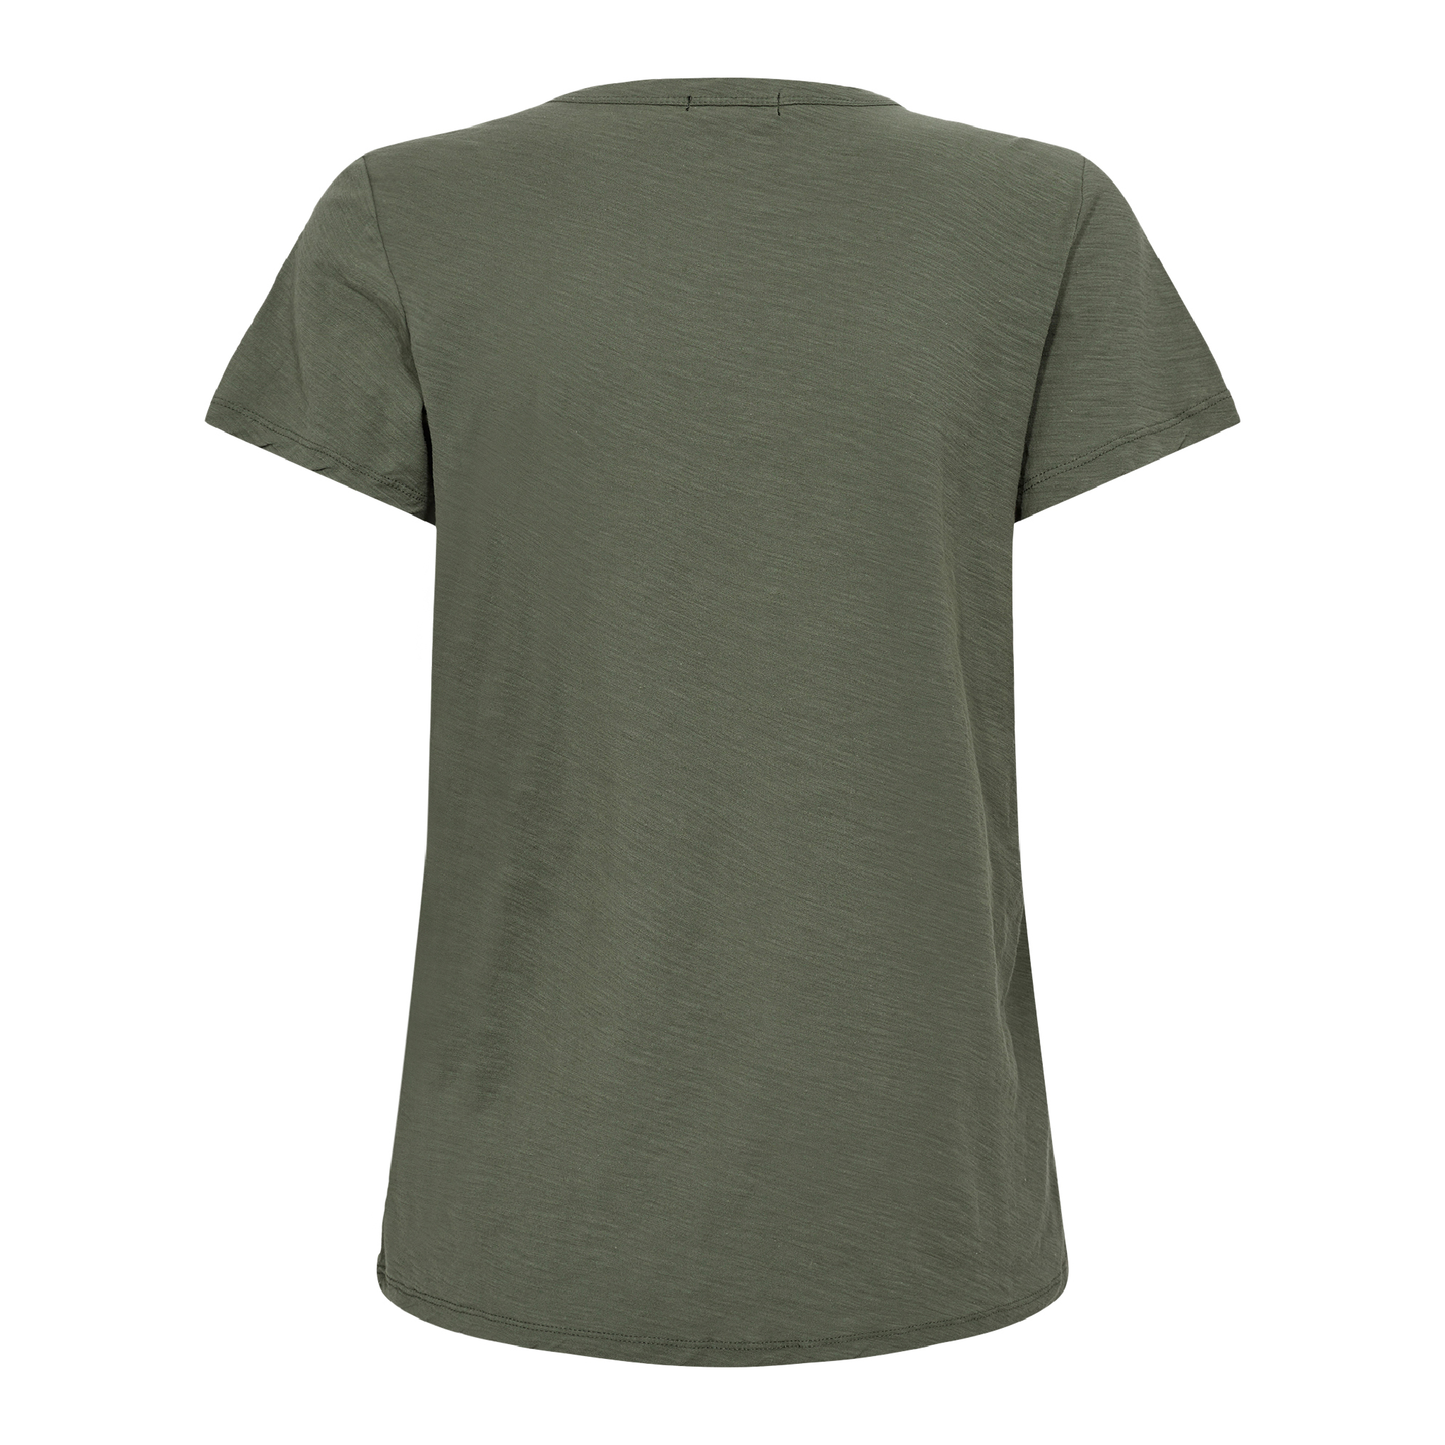 Any 1 T-Shirt M. Round Neck, Army